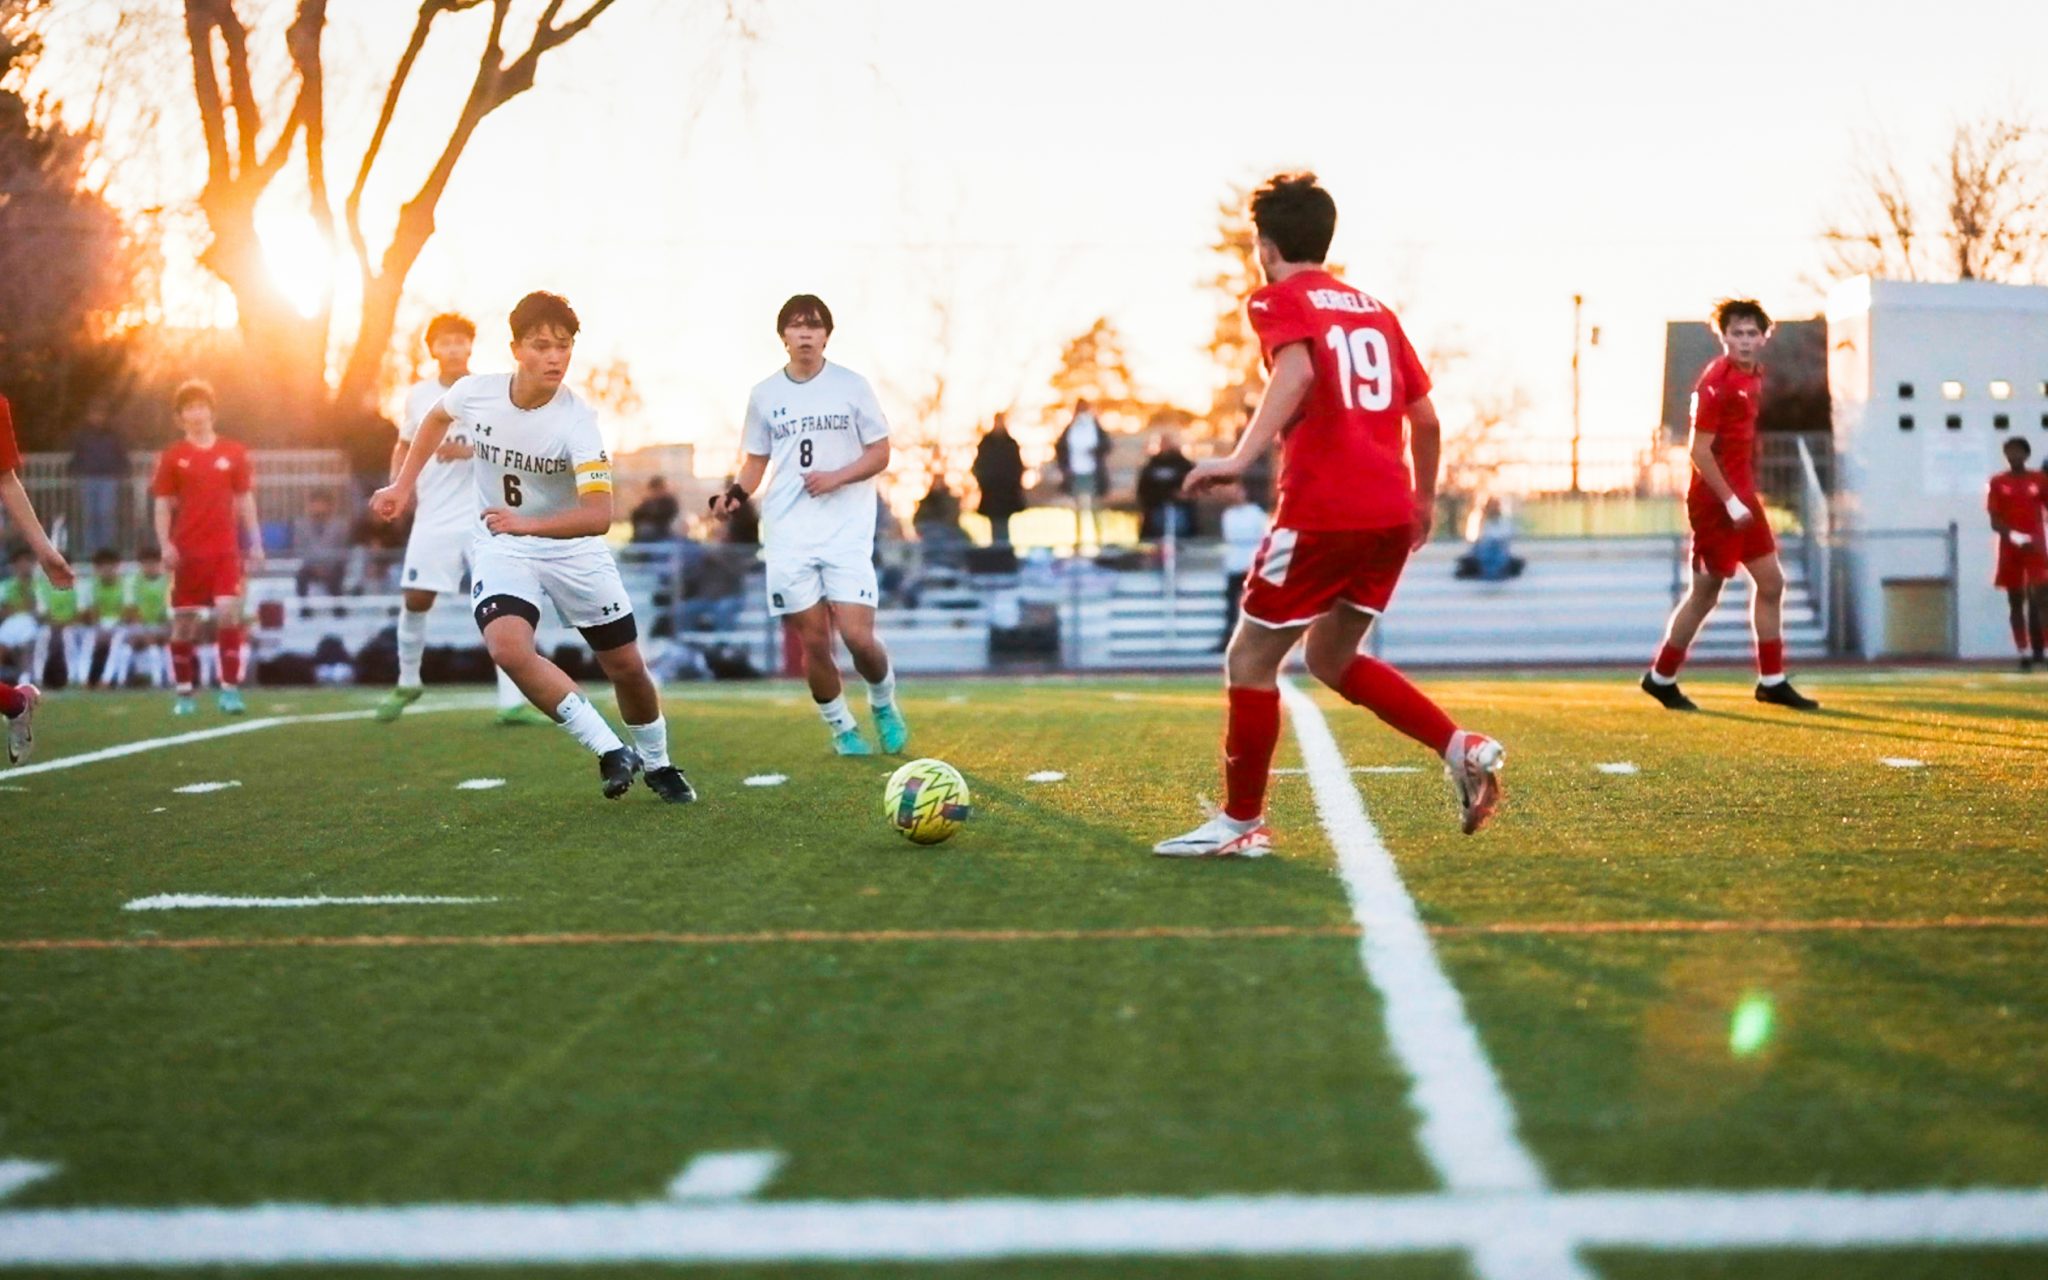 Boys soccer won four games to be declared champions.